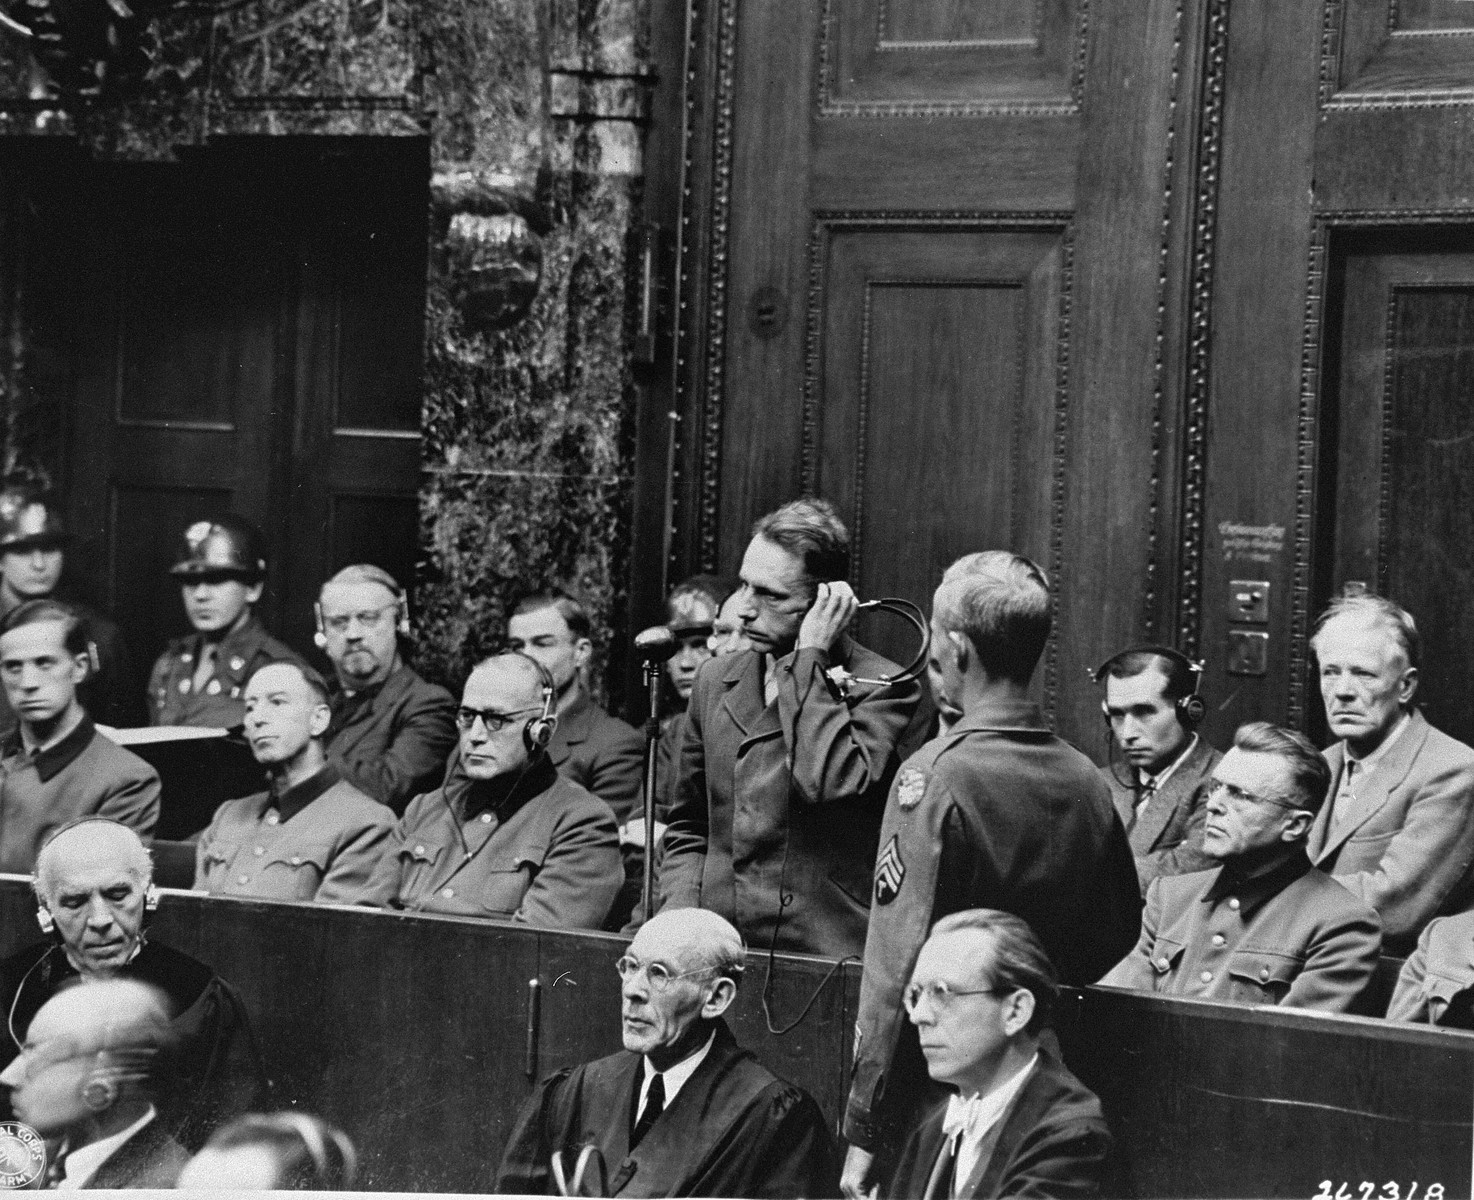 Wilhelm Beiglboeck pleads "not guilty" to the charges against him at the Doctors Trial.  Beiglboeck was a consulting physician to the Luftwaffe.